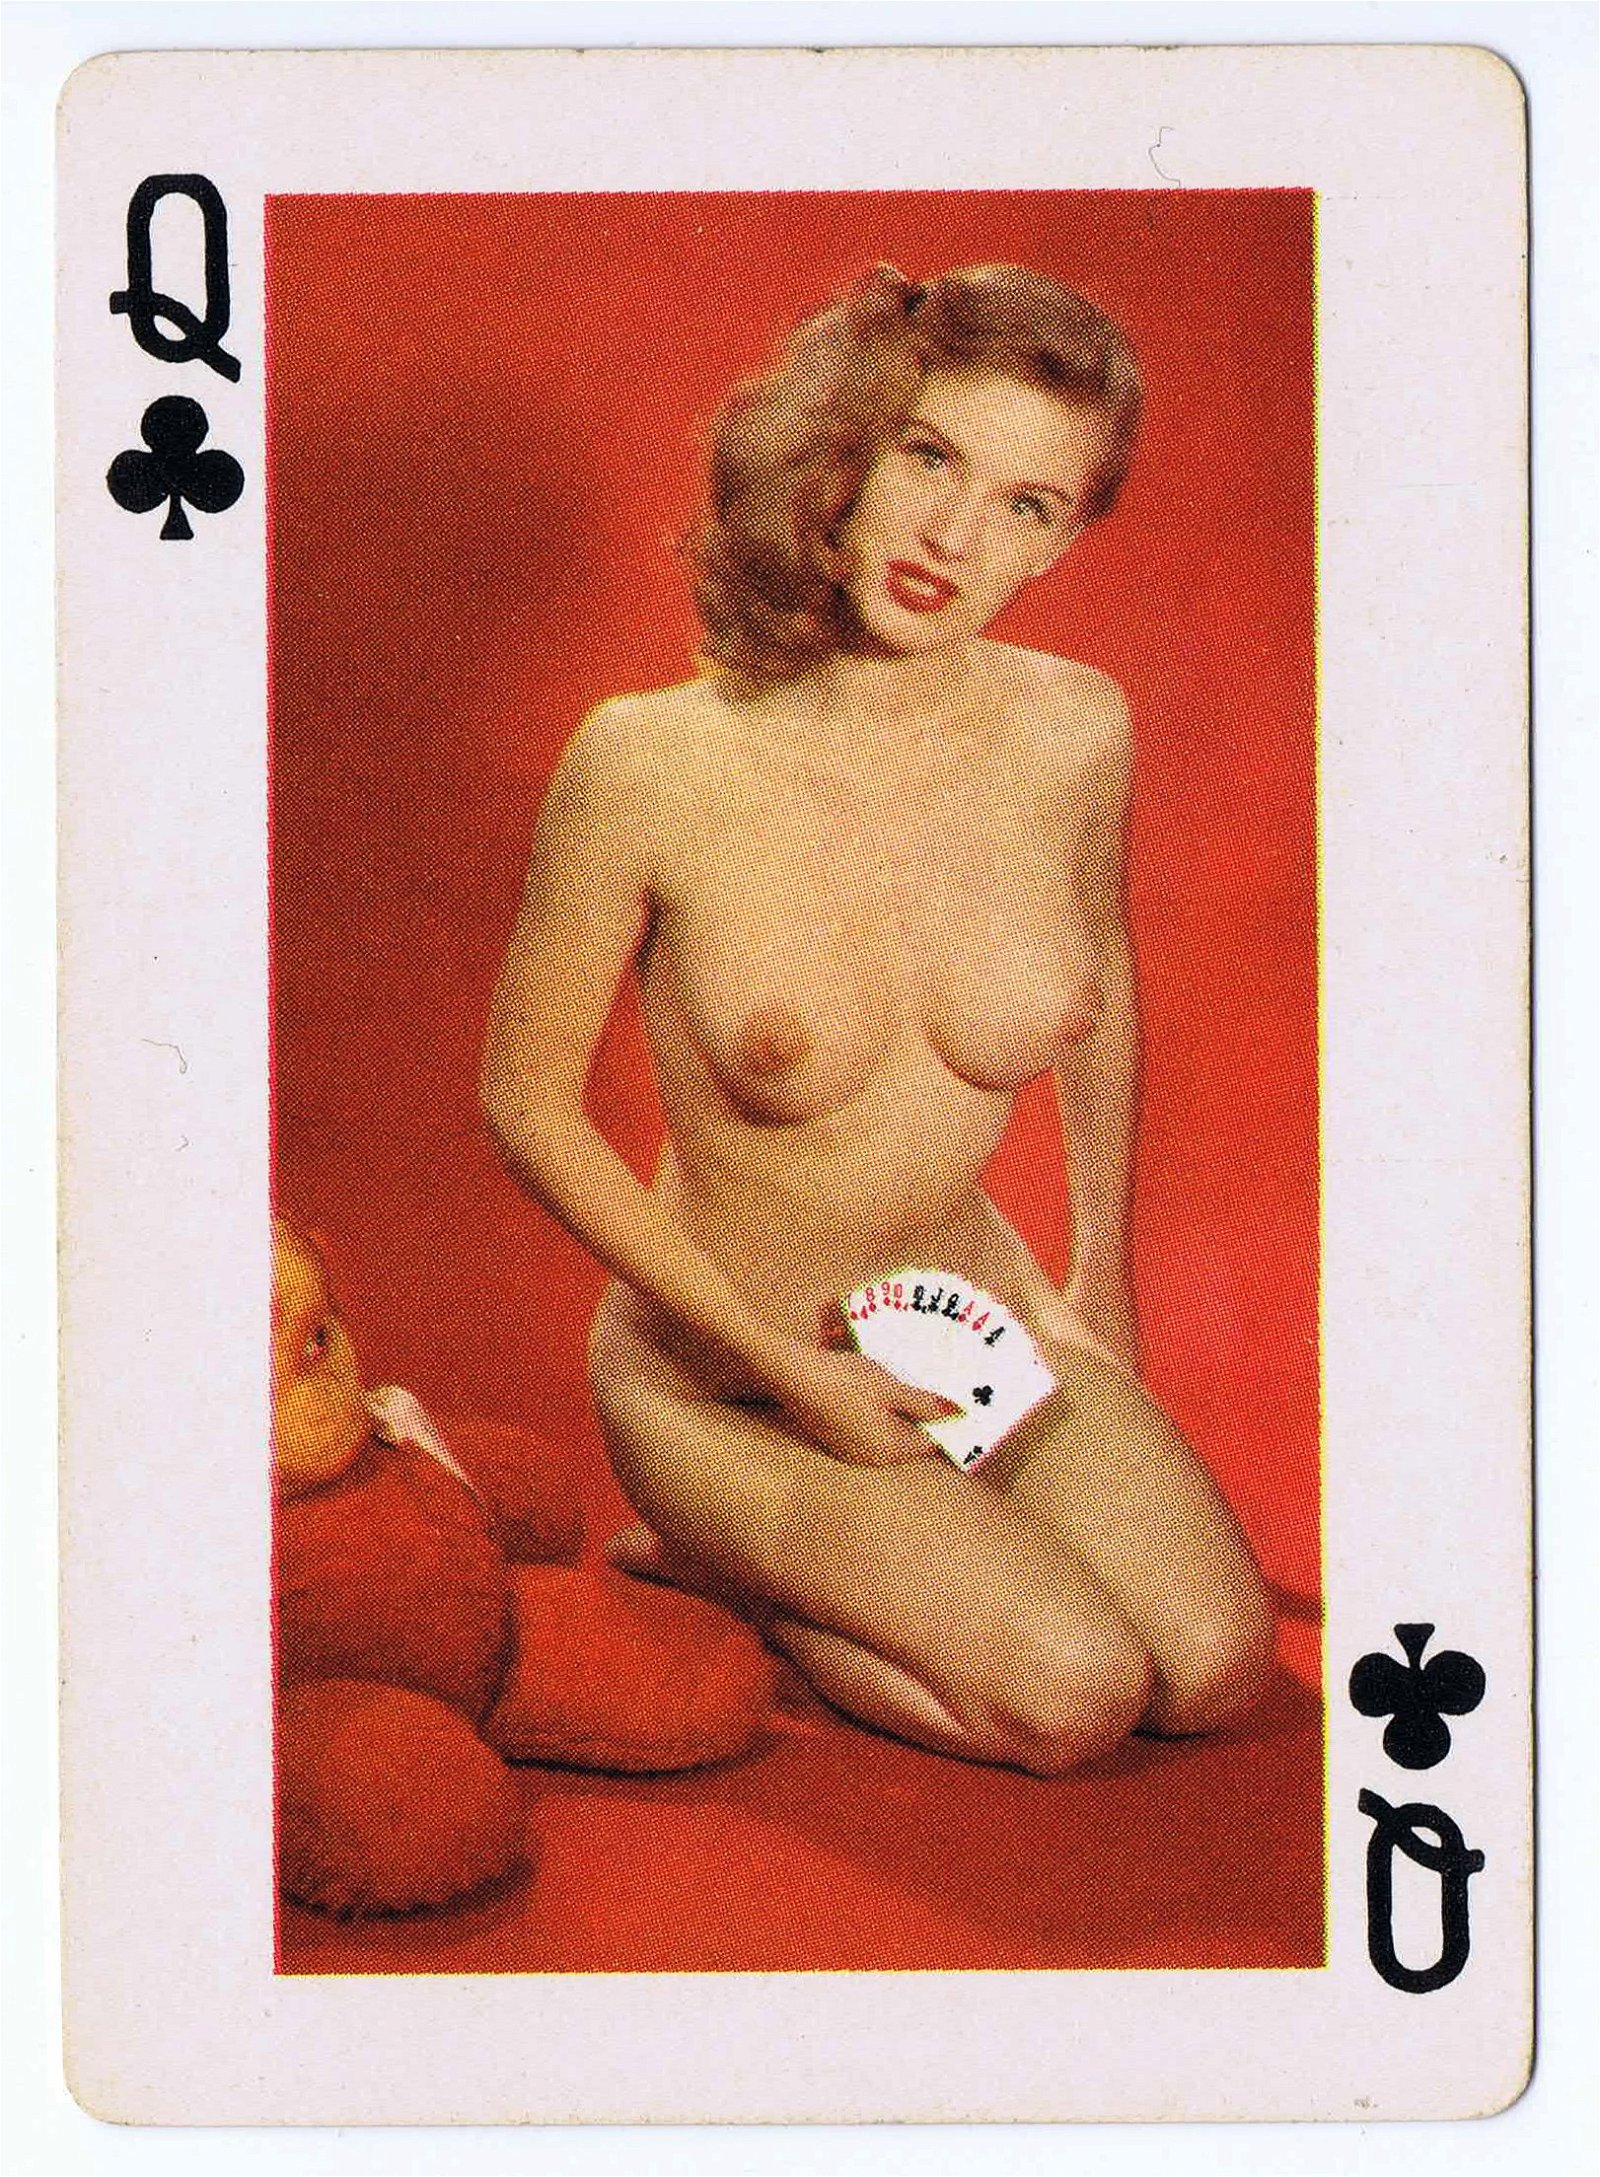 Photo by CRD Larson Art with the username @CRDLarson, who is a verified user,  September 3, 2019 at 7:39 AM. The post is about the topic Nude Playing Cards and the text says '#Queen of Clubs

From deck titled 'Fifty-Two Art Studies.' Made by the Novelties Manufacturing and Sales Corp, St. Louis, MO. Mid 1950s.

#photography #vintagenude #vintageerotica #1950s #retro #pinup #boudoir #burlesque #playingcards #glamour..'